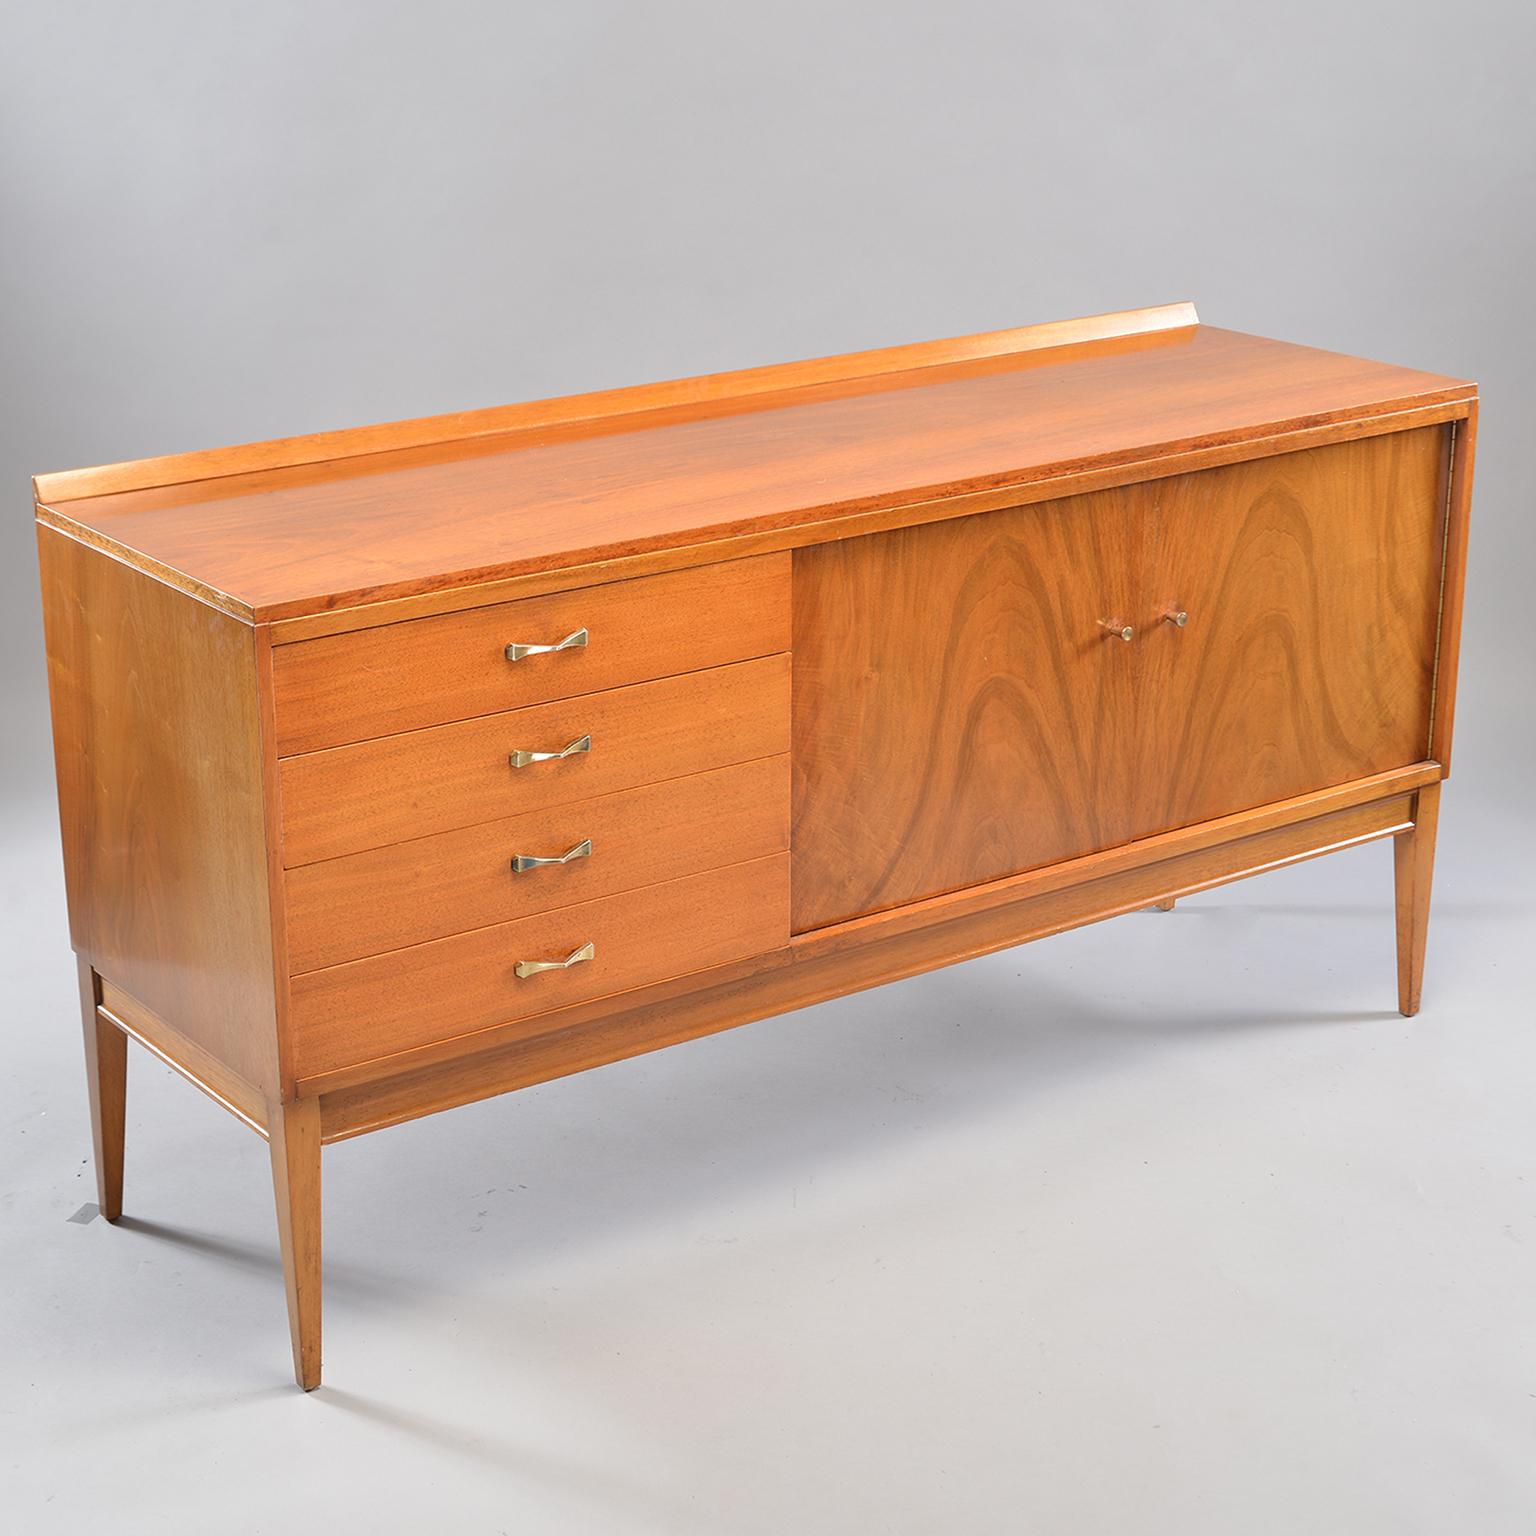 English blond walnut sideboard features four drawers and a cabinet section with an internal shelf, circa 1950s. Beautiful figuring on the two hinged doors. Tapered legs and brass hardware. Unknown maker.